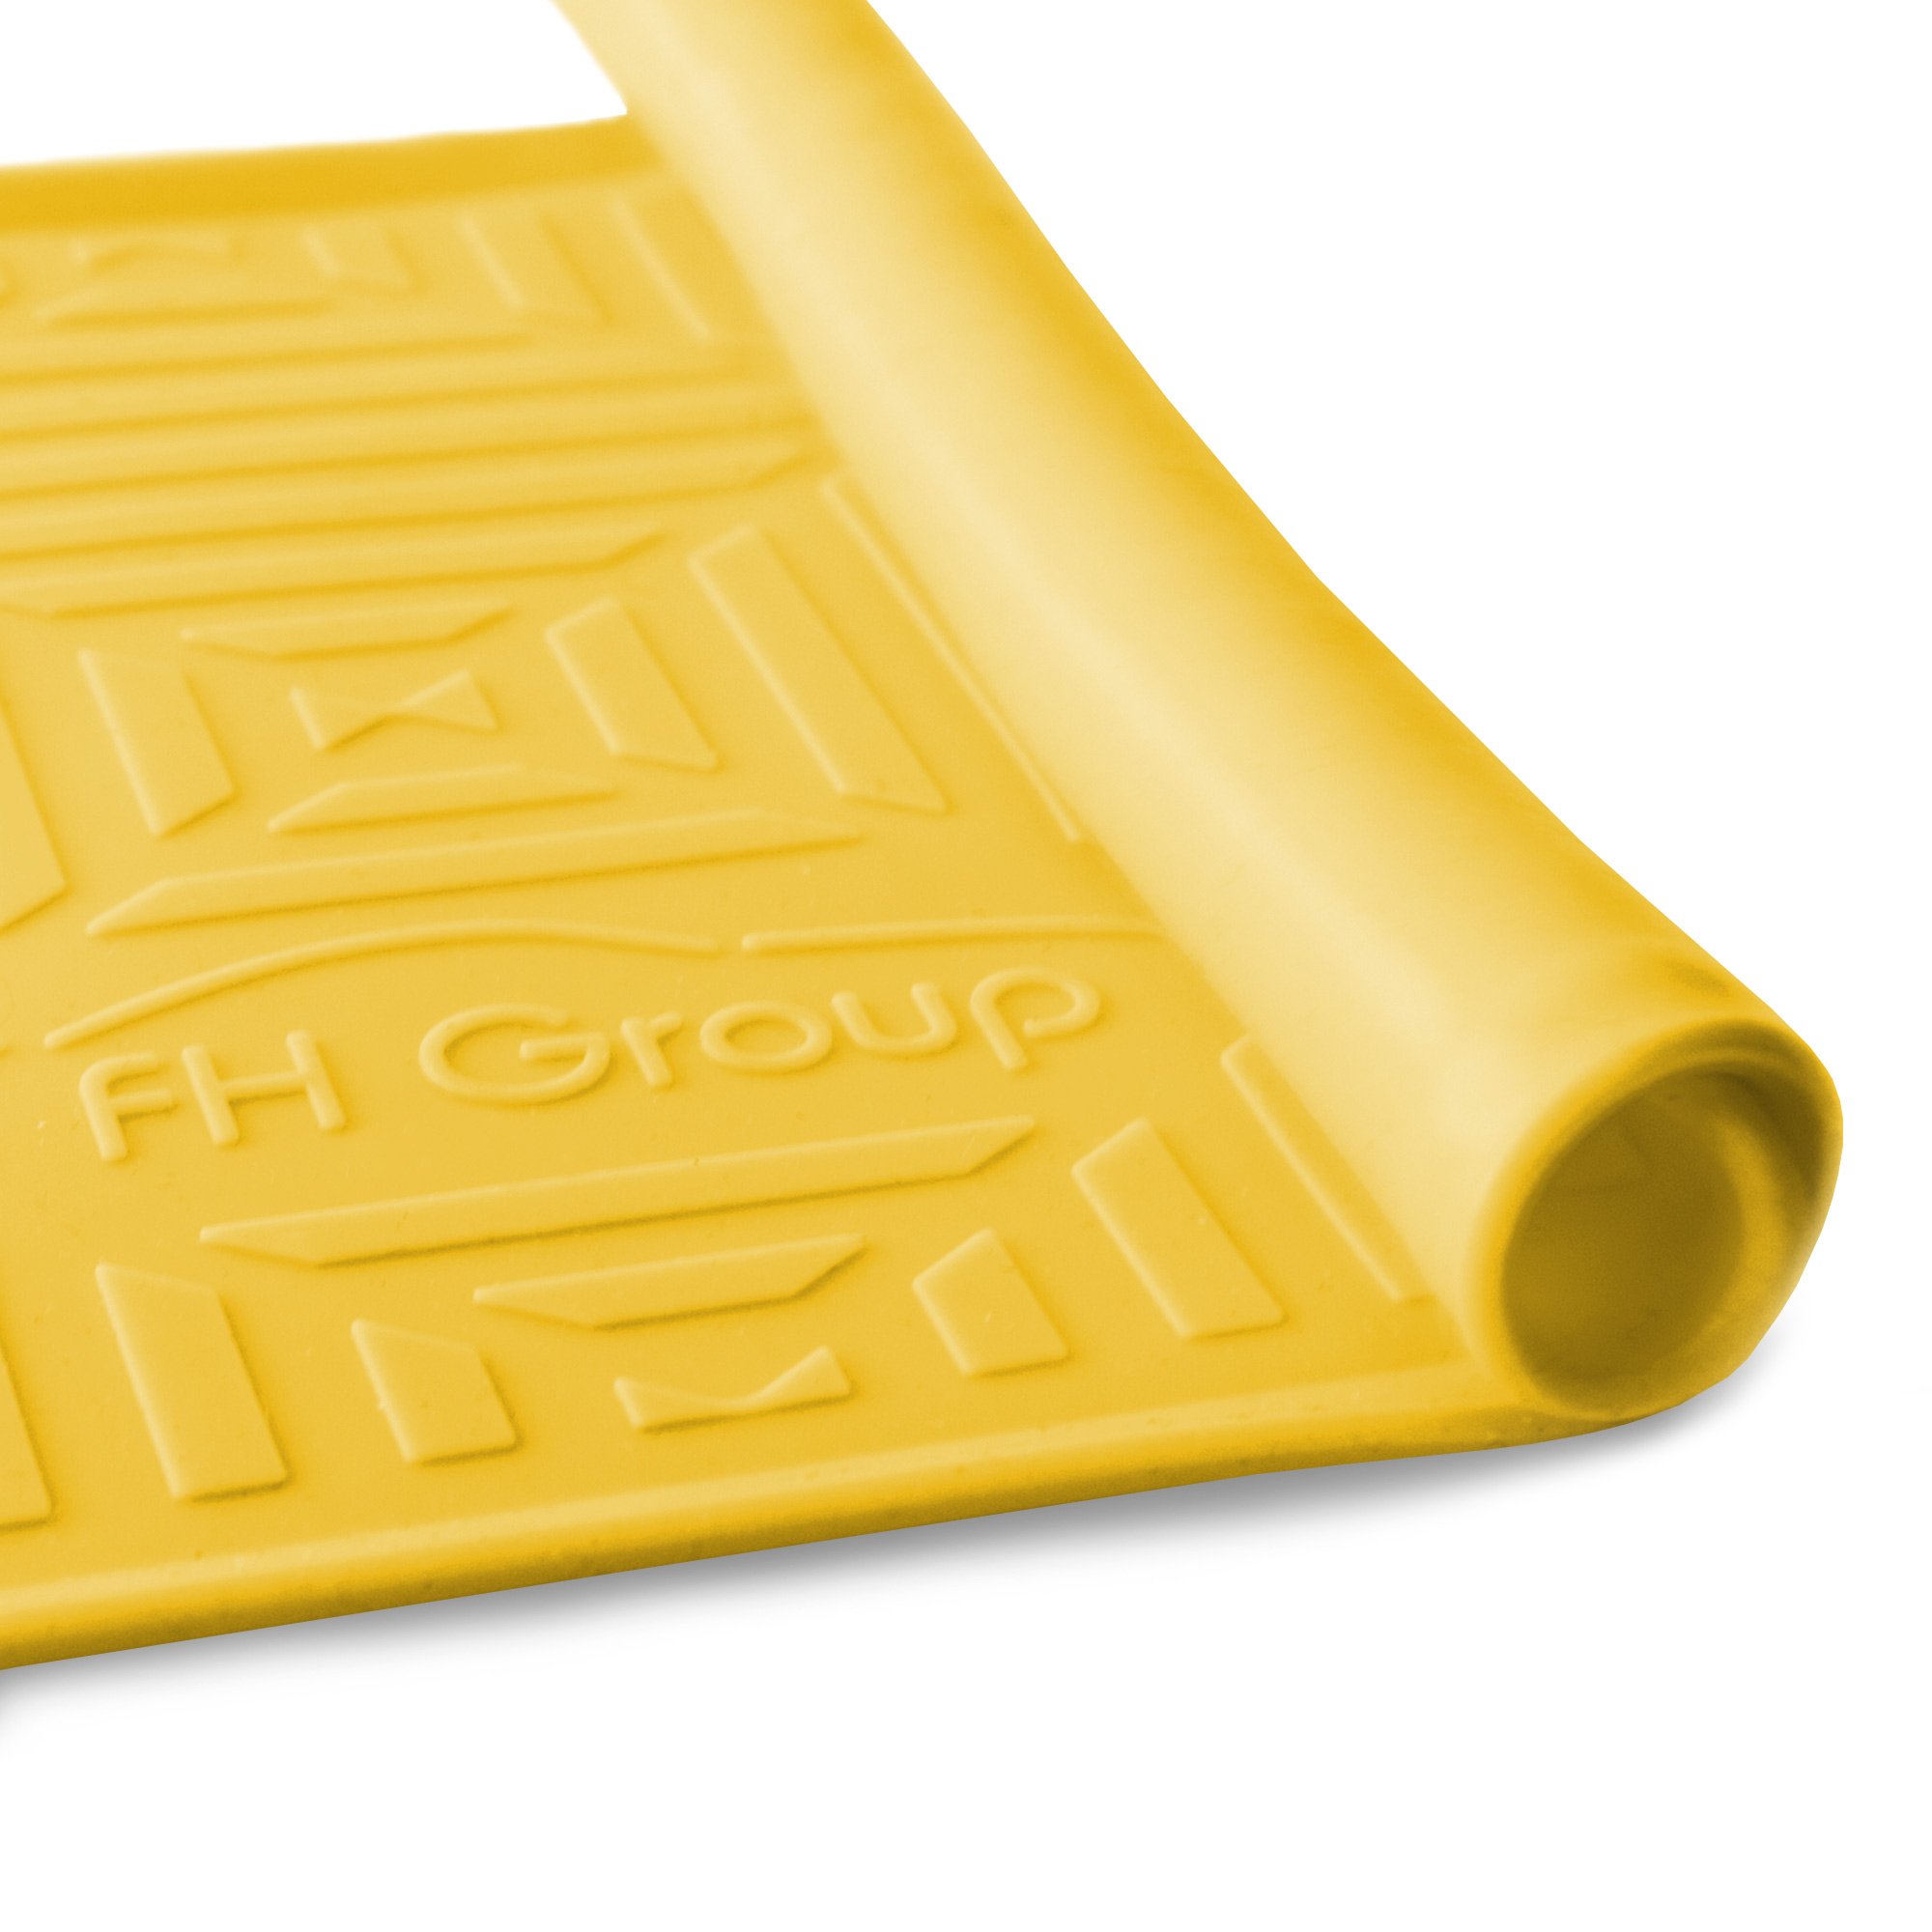 FH Group FH3011YELLOW Silicone Anti-slip Yellow Dash Mat for Smartphones (iPhone Plus, Galaxy Note, Coin Grip)